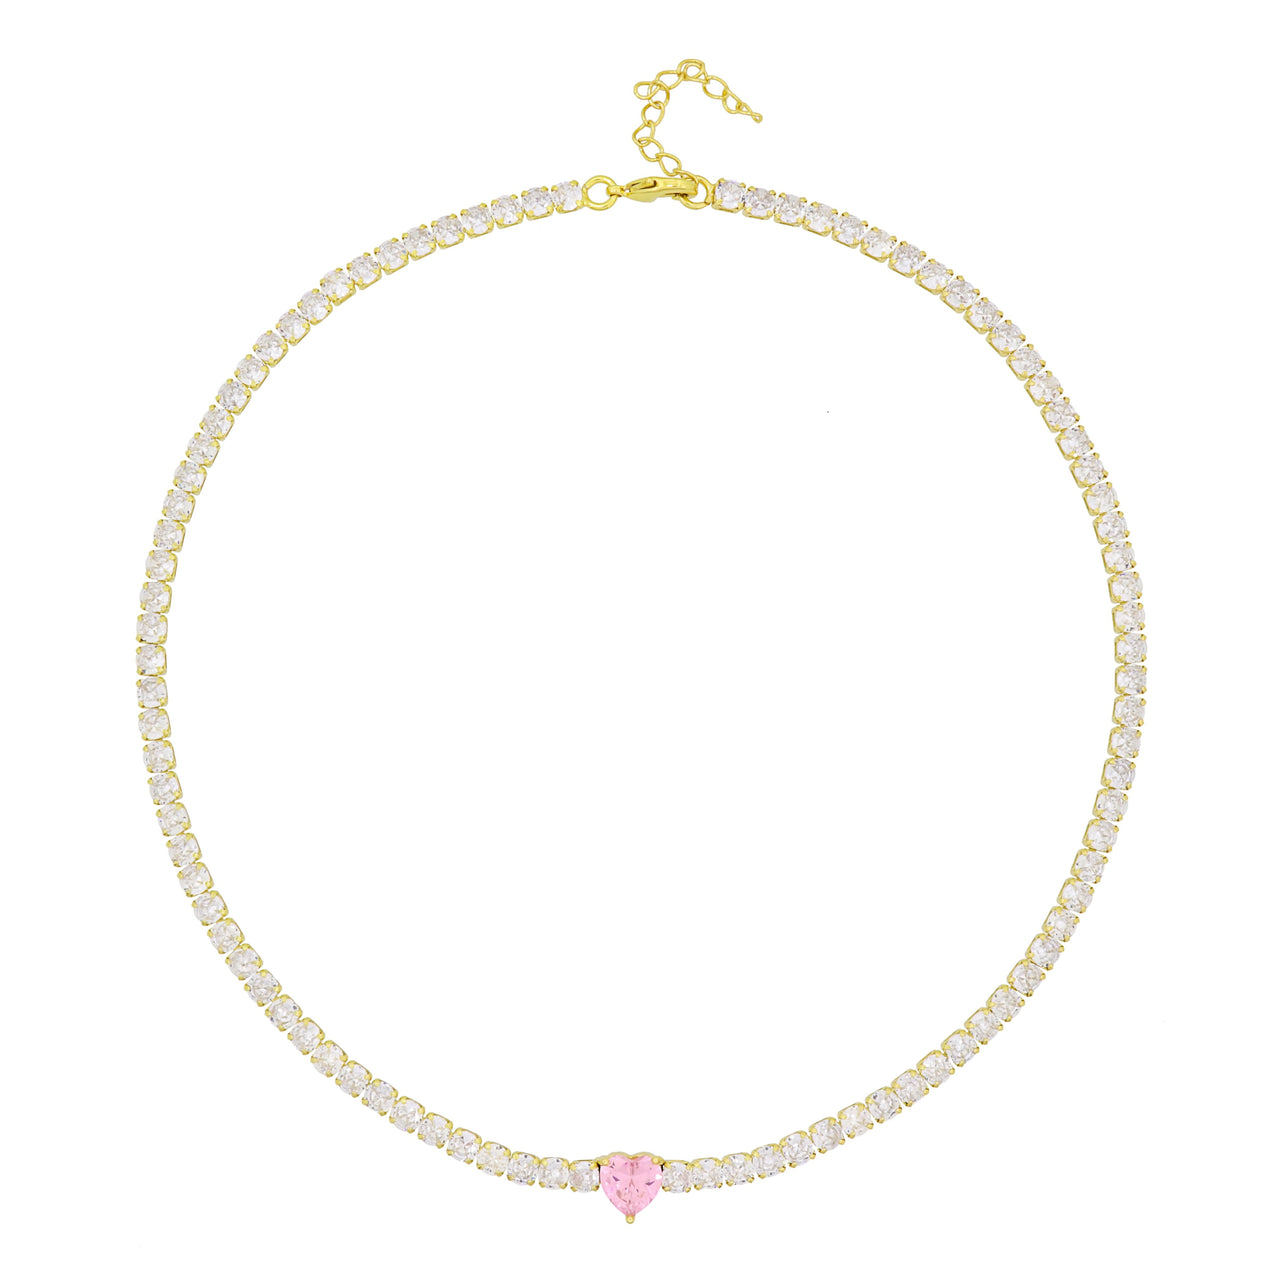 Heartly Tennis Necklace White/Gold/Pink 5mm